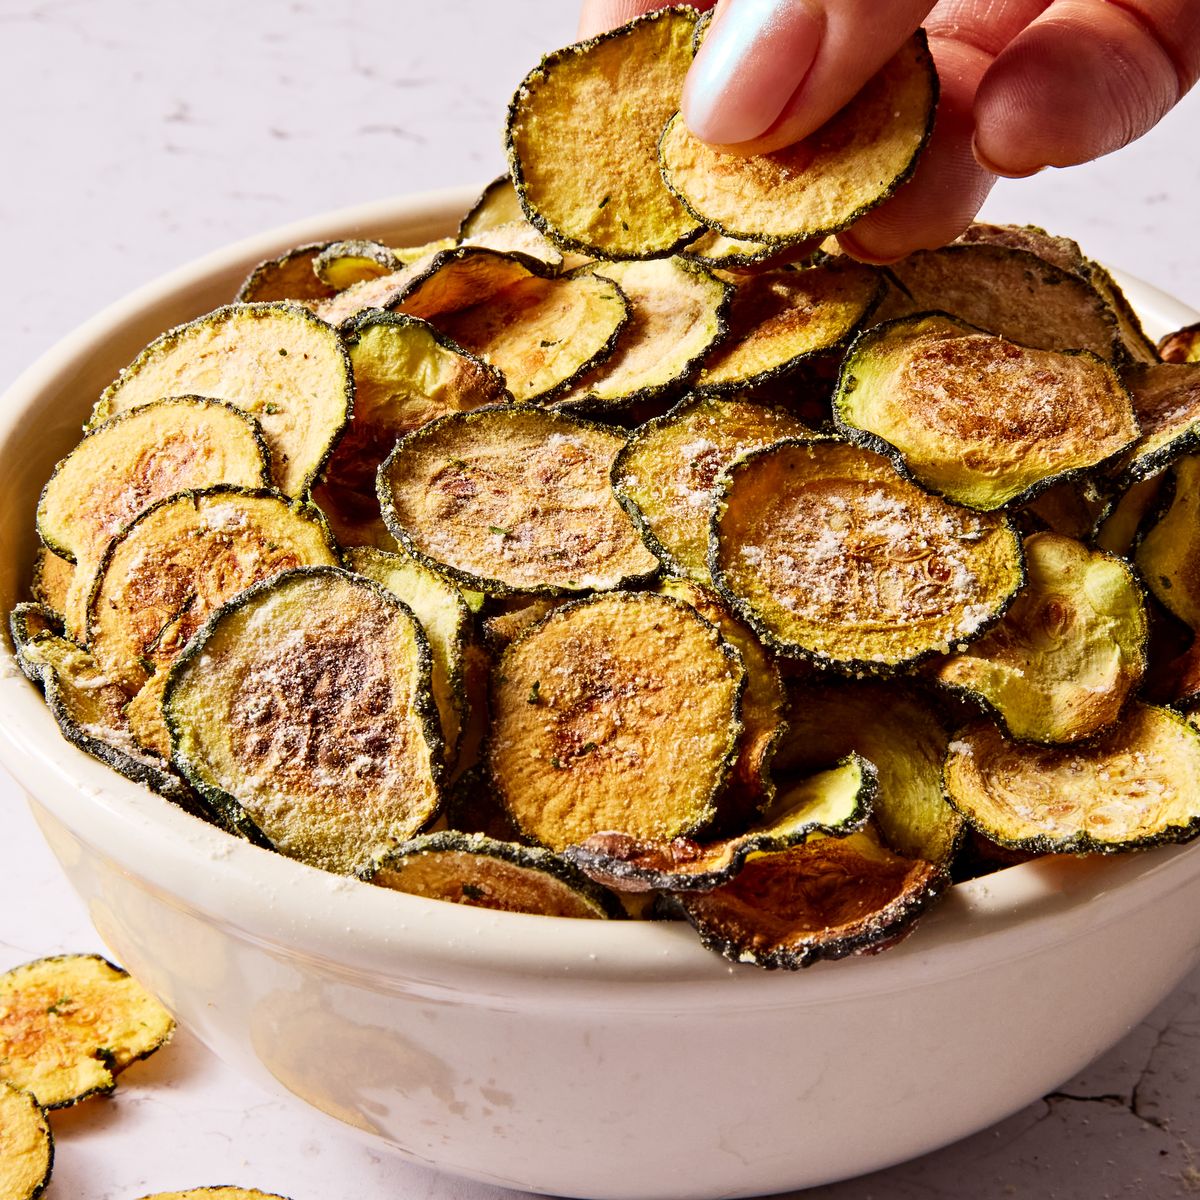 Cool Ranch Zucchini Chips

#different_recipes #recipe #recipes #healthyfood #healthylifestyle #healthy #fitness #homecooking #healthyeating #homemade #nutrition #fit #healthyrecipes #eatclean #lifestyle #healthylife #cleaneating